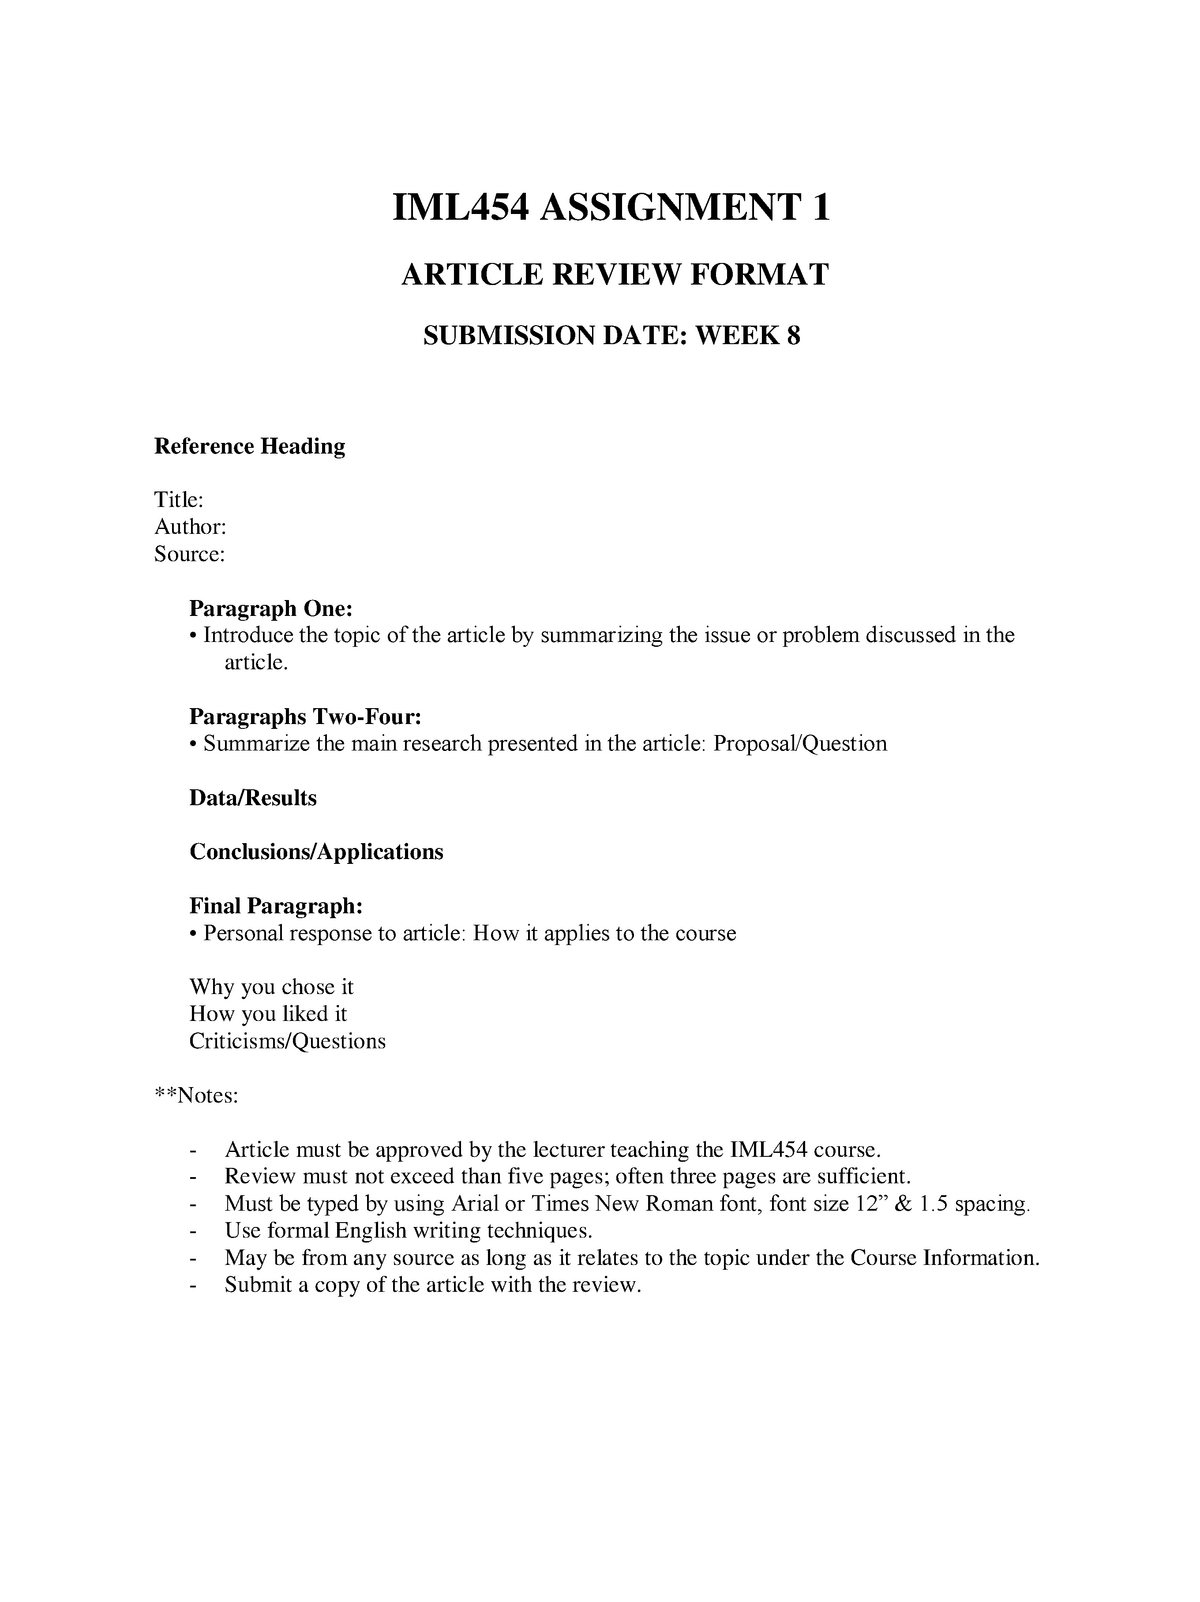 article review format doc